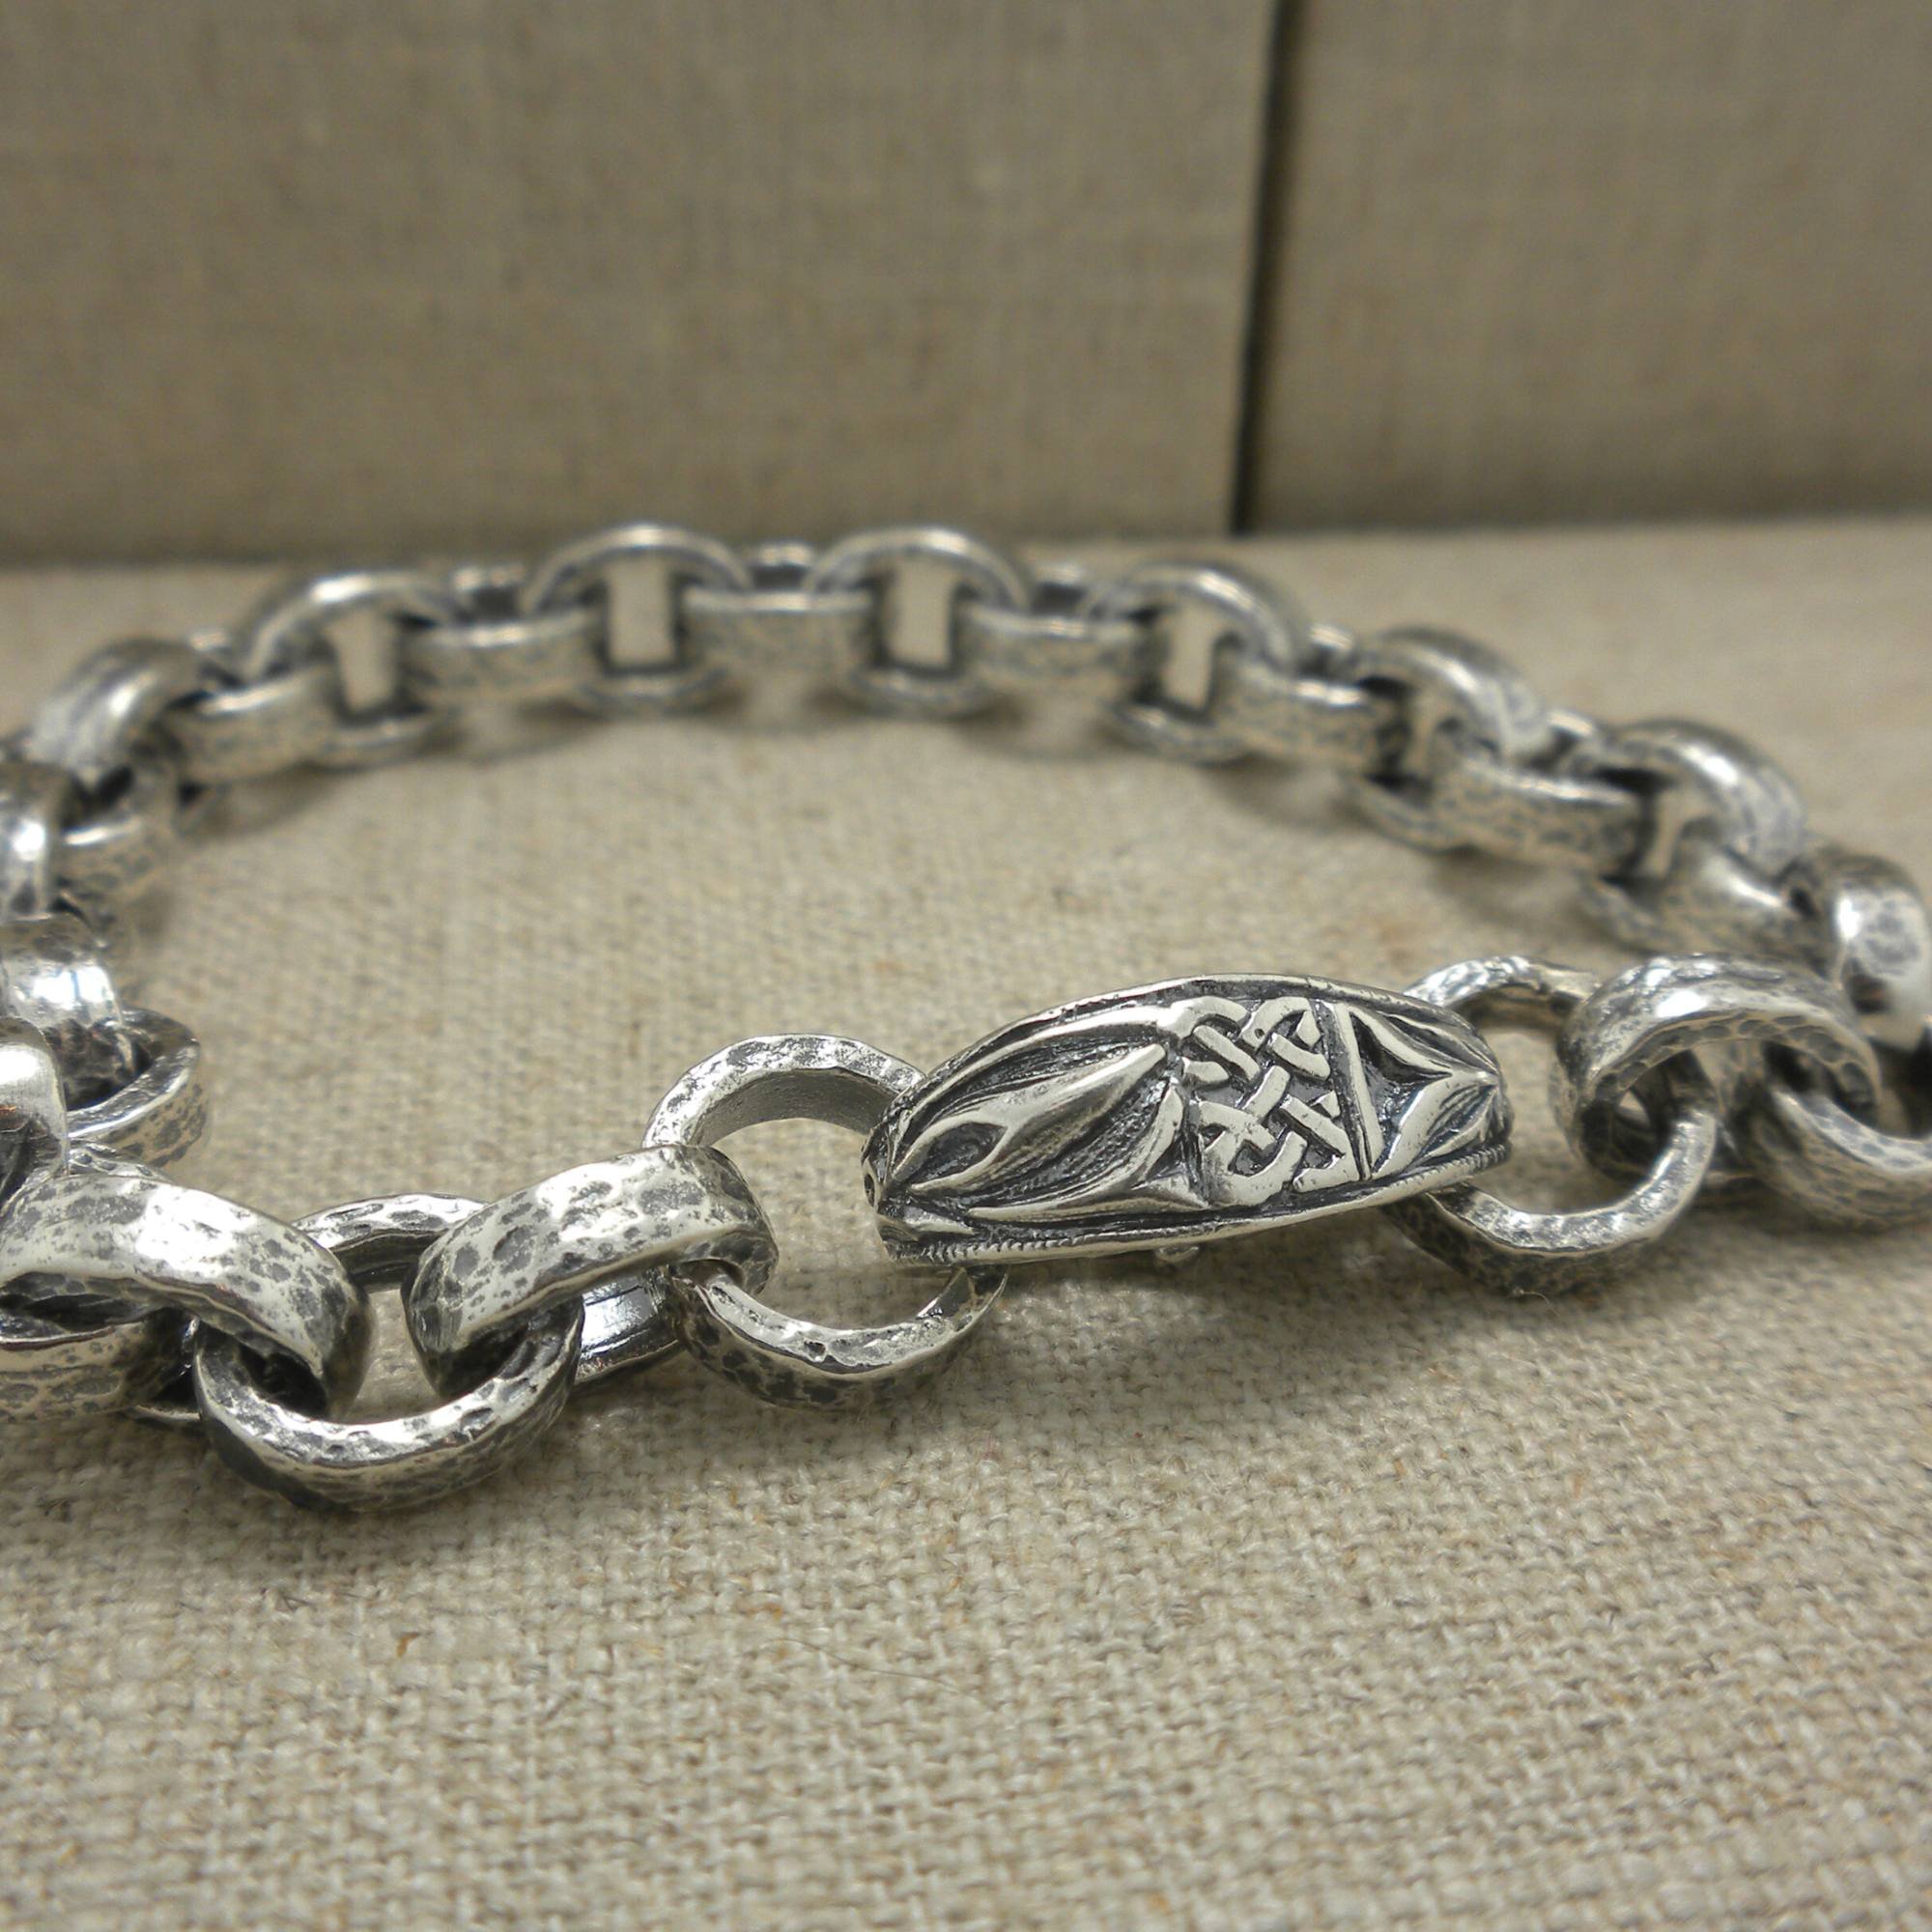 Heavy Oval Ring Hammered "Pictish" Bracelet in Sterling Silver